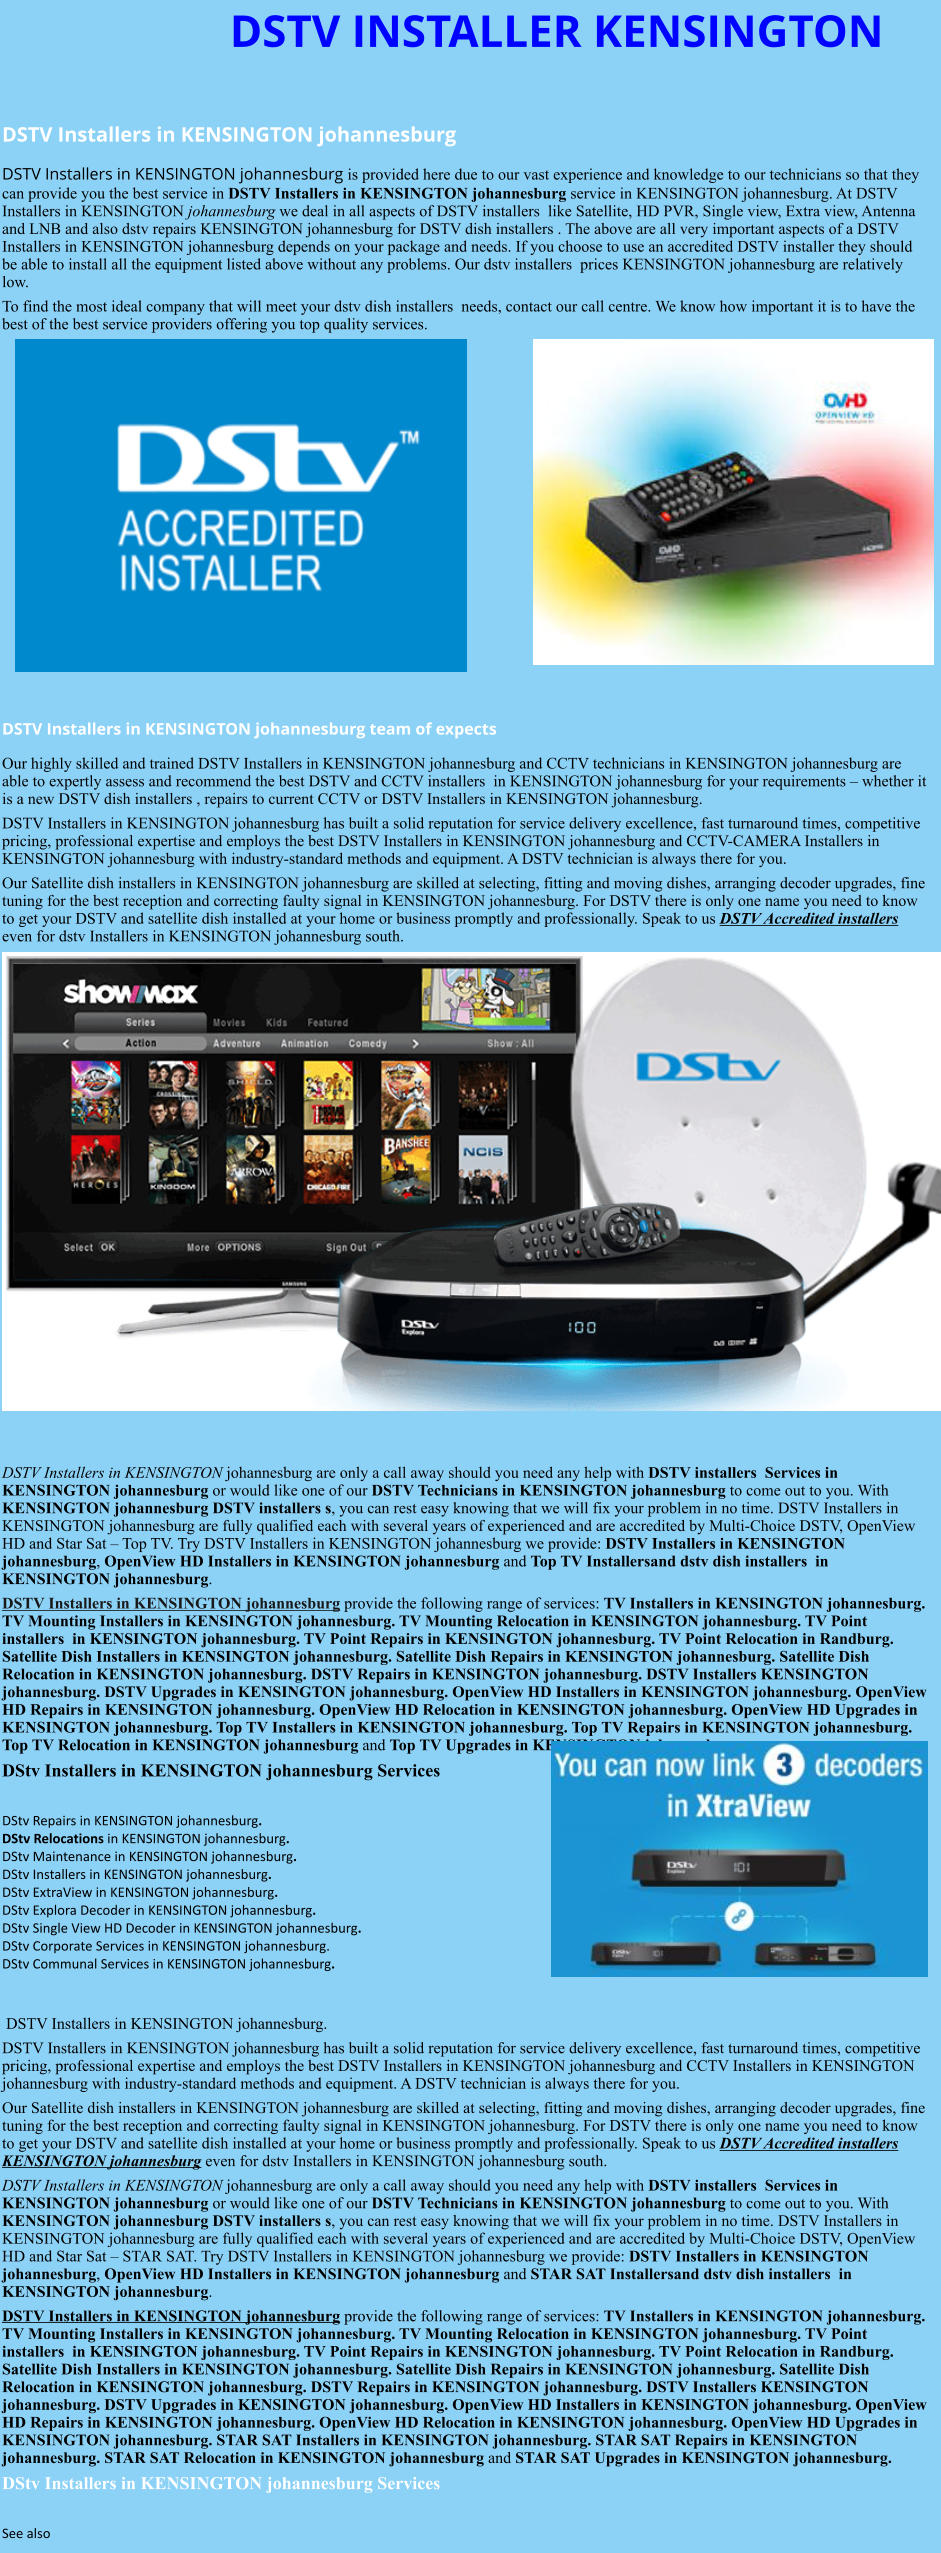 DSTV INSTALLER KENSINGTON  DSTV Installers in KENSINGTON johannesburg  DSTV Installers in KENSINGTON johannesburg is provided here due to our vast experience and knowledge to our technicians so that they can provide you the best service in DSTV Installers in KENSINGTON johannesburg service in KENSINGTON johannesburg. At DSTV Installers in KENSINGTON johannesburg we deal in all aspects of DSTV installers  like Satellite, HD PVR, Single view, Extra view, Antenna and LNB and also dstv repairs KENSINGTON johannesburg for DSTV dish installers . The above are all very important aspects of a DSTV Installers in KENSINGTON johannesburg depends on your package and needs. If you choose to use an accredited DSTV installer they should be able to install all the equipment listed above without any problems. Our dstv installers  prices KENSINGTON johannesburg are relatively low. To find the most ideal company that will meet your dstv dish installers  needs, contact our call centre. We know how important it is to have the best of the best service providers offering you top quality services.                DSTV Installers in KENSINGTON johannesburg team of expects Our highly skilled and trained DSTV Installers in KENSINGTON johannesburg and CCTV technicians in KENSINGTON johannesburg are able to expertly assess and recommend the best DSTV and CCTV installers  in KENSINGTON johannesburg for your requirements – whether it is a new DSTV dish installers , repairs to current CCTV or DSTV Installers in KENSINGTON johannesburg. DSTV Installers in KENSINGTON johannesburg has built a solid reputation for service delivery excellence, fast turnaround times, competitive pricing, professional expertise and employs the best DSTV Installers in KENSINGTON johannesburg and CCTV-CAMERA Installers in KENSINGTON johannesburg with industry-standard methods and equipment. A DSTV technician is always there for you. Our Satellite dish installers in KENSINGTON johannesburg are skilled at selecting, fitting and moving dishes, arranging decoder upgrades, fine tuning for the best reception and correcting faulty signal in KENSINGTON johannesburg. For DSTV there is only one name you need to know to get your DSTV and satellite dish installed at your home or business promptly and professionally. Speak to us DSTV Accredited installers even for dstv Installers in KENSINGTON johannesburg south.                      DSTV Installers in KENSINGTON johannesburg are only a call away should you need any help with DSTV installers  Services in KENSINGTON johannesburg or would like one of our DSTV Technicians in KENSINGTON johannesburg to come out to you. With KENSINGTON johannesburg DSTV installers s, you can rest easy knowing that we will fix your problem in no time. DSTV Installers in KENSINGTON johannesburg are fully qualified each with several years of experienced and are accredited by Multi-Choice DSTV, OpenView HD and Star Sat – Top TV. Try DSTV Installers in KENSINGTON johannesburg we provide: DSTV Installers in KENSINGTON johannesburg, OpenView HD Installers in KENSINGTON johannesburg and Top TV Installersand dstv dish installers  in KENSINGTON johannesburg. DSTV Installers in KENSINGTON johannesburg provide the following range of services: TV Installers in KENSINGTON johannesburg. TV Mounting Installers in KENSINGTON johannesburg. TV Mounting Relocation in KENSINGTON johannesburg. TV Point installers  in KENSINGTON johannesburg. TV Point Repairs in KENSINGTON johannesburg. TV Point Relocation in Randburg. Satellite Dish Installers in KENSINGTON johannesburg. Satellite Dish Repairs in KENSINGTON johannesburg. Satellite Dish Relocation in KENSINGTON johannesburg. DSTV Repairs in KENSINGTON johannesburg. DSTV Installers KENSINGTON johannesburg. DSTV Upgrades in KENSINGTON johannesburg. OpenView HD Installers in KENSINGTON johannesburg. OpenView HD Repairs in KENSINGTON johannesburg. OpenView HD Relocation in KENSINGTON johannesburg. OpenView HD Upgrades in KENSINGTON johannesburg. Top TV Installers in KENSINGTON johannesburg. Top TV Repairs in KENSINGTON johannesburg. Top TV Relocation in KENSINGTON johannesburg and Top TV Upgrades in KENSINGTON johannesburg. DStv Installers in KENSINGTON johannesburg Services  DStv Repairs in KENSINGTON johannesburg.  DStv Relocations in KENSINGTON johannesburg.  DStv Maintenance in KENSINGTON johannesburg. DStv Installers in KENSINGTON johannesburg. DStv ExtraView in KENSINGTON johannesburg. DStv Explora Decoder in KENSINGTON johannesburg. DStv Single View HD Decoder in KENSINGTON johannesburg. DStv Corporate Services in KENSINGTON johannesburg. DStv Communal Services in KENSINGTON johannesburg.    DSTV Installers in KENSINGTON johannesburg. DSTV Installers in KENSINGTON johannesburg has built a solid reputation for service delivery excellence, fast turnaround times, competitive pricing, professional expertise and employs the best DSTV Installers in KENSINGTON johannesburg and CCTV Installers in KENSINGTON johannesburg with industry-standard methods and equipment. A DSTV technician is always there for you. Our Satellite dish installers in KENSINGTON johannesburg are skilled at selecting, fitting and moving dishes, arranging decoder upgrades, fine tuning for the best reception and correcting faulty signal in KENSINGTON johannesburg. For DSTV there is only one name you need to know to get your DSTV and satellite dish installed at your home or business promptly and professionally. Speak to us DSTV Accredited installers KENSINGTON johannesburg even for dstv Installers in KENSINGTON johannesburg south. DSTV Installers in KENSINGTON johannesburg are only a call away should you need any help with DSTV installers  Services in KENSINGTON johannesburg or would like one of our DSTV Technicians in KENSINGTON johannesburg to come out to you. With KENSINGTON johannesburg DSTV installers s, you can rest easy knowing that we will fix your problem in no time. DSTV Installers in KENSINGTON johannesburg are fully qualified each with several years of experienced and are accredited by Multi-Choice DSTV, OpenView HD and Star Sat – STAR SAT. Try DSTV Installers in KENSINGTON johannesburg we provide: DSTV Installers in KENSINGTON johannesburg, OpenView HD Installers in KENSINGTON johannesburg and STAR SAT Installersand dstv dish installers  in KENSINGTON johannesburg. DSTV Installers in KENSINGTON johannesburg provide the following range of services: TV Installers in KENSINGTON johannesburg. TV Mounting Installers in KENSINGTON johannesburg. TV Mounting Relocation in KENSINGTON johannesburg. TV Point installers  in KENSINGTON johannesburg. TV Point Repairs in KENSINGTON johannesburg. TV Point Relocation in Randburg. Satellite Dish Installers in KENSINGTON johannesburg. Satellite Dish Repairs in KENSINGTON johannesburg. Satellite Dish Relocation in KENSINGTON johannesburg. DSTV Repairs in KENSINGTON johannesburg. DSTV Installers KENSINGTON johannesburg. DSTV Upgrades in KENSINGTON johannesburg. OpenView HD Installers in KENSINGTON johannesburg. OpenView HD Repairs in KENSINGTON johannesburg. OpenView HD Relocation in KENSINGTON johannesburg. OpenView HD Upgrades in KENSINGTON johannesburg. STAR SAT Installers in KENSINGTON johannesburg. STAR SAT Repairs in KENSINGTON johannesburg. STAR SAT Relocation in KENSINGTON johannesburg and STAR SAT Upgrades in KENSINGTON johannesburg. DStv Installers in KENSINGTON johannesburg Services  See also